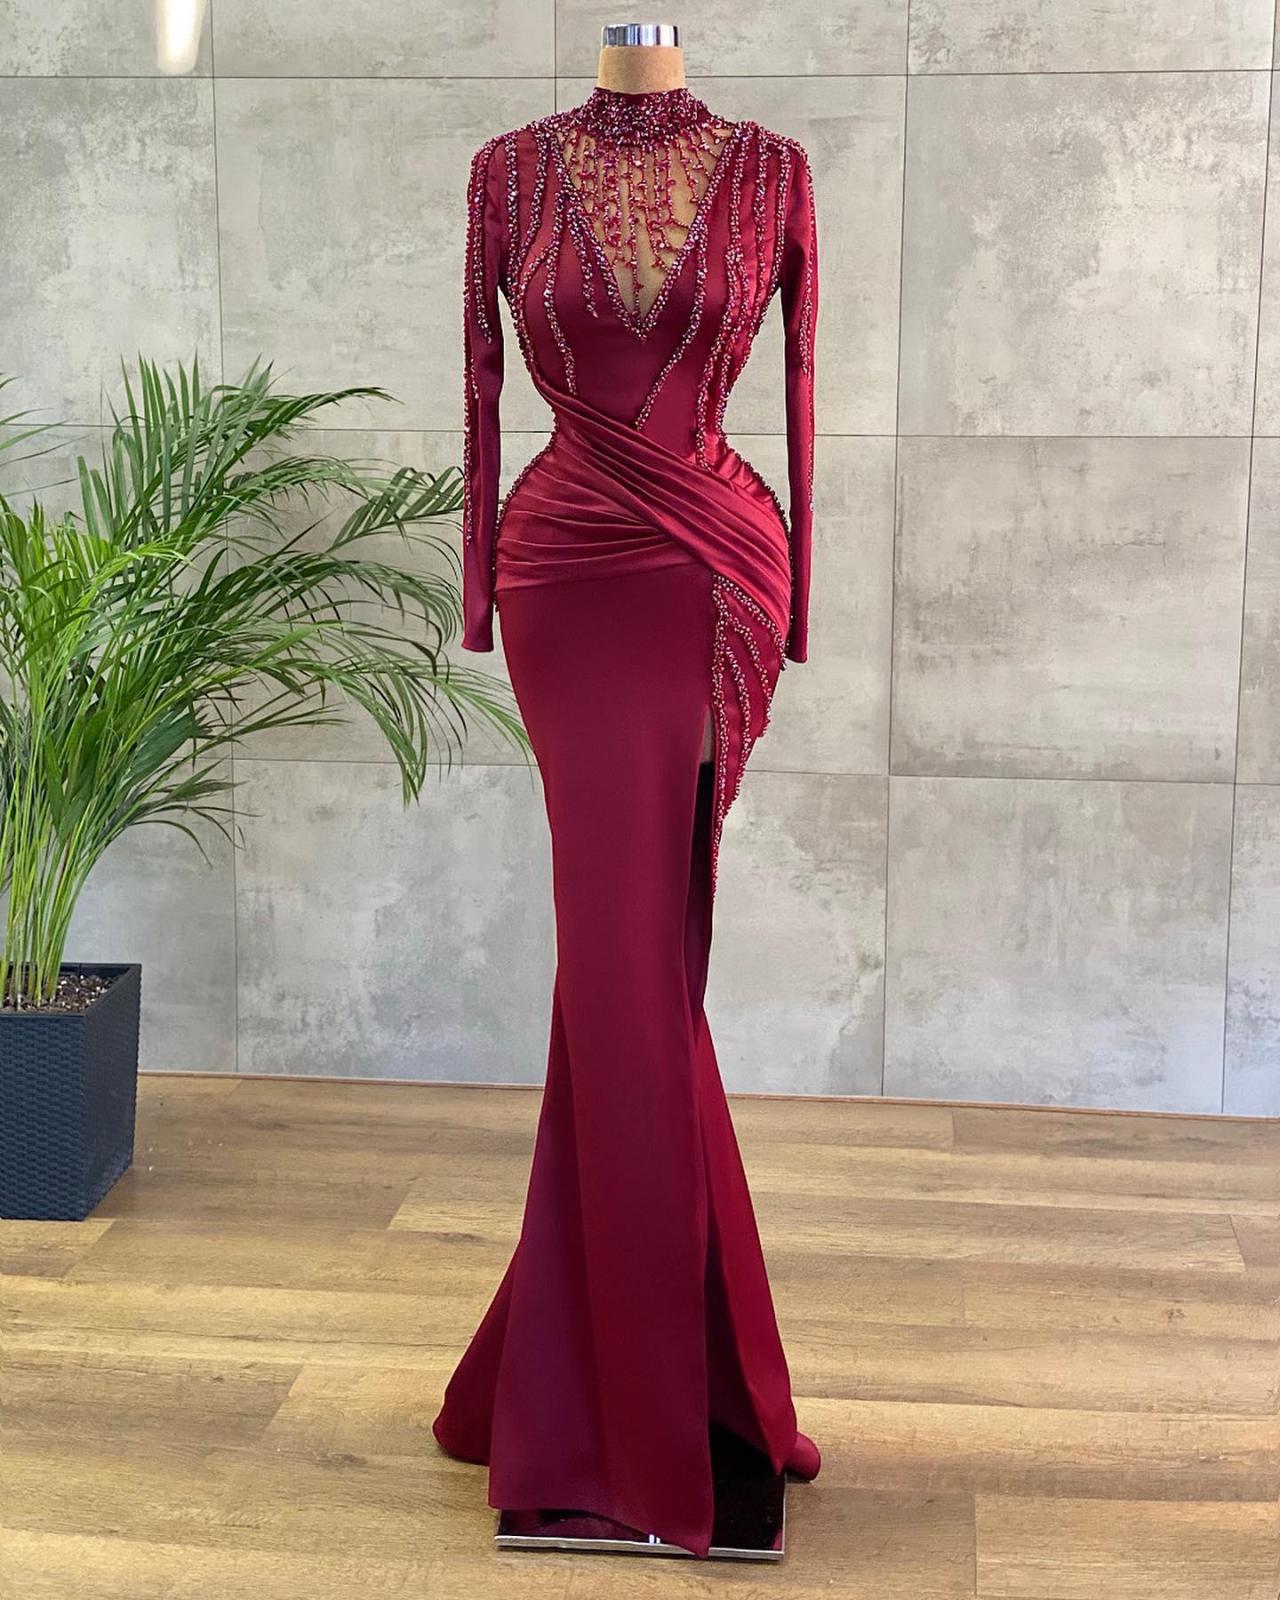 2023 Sexy Prom Dresses Burgundy Dark Red High Neck Long Sleeves Mermaid Illusion Sweep Train Crystal Beading Plus Size Evening Gowns Party